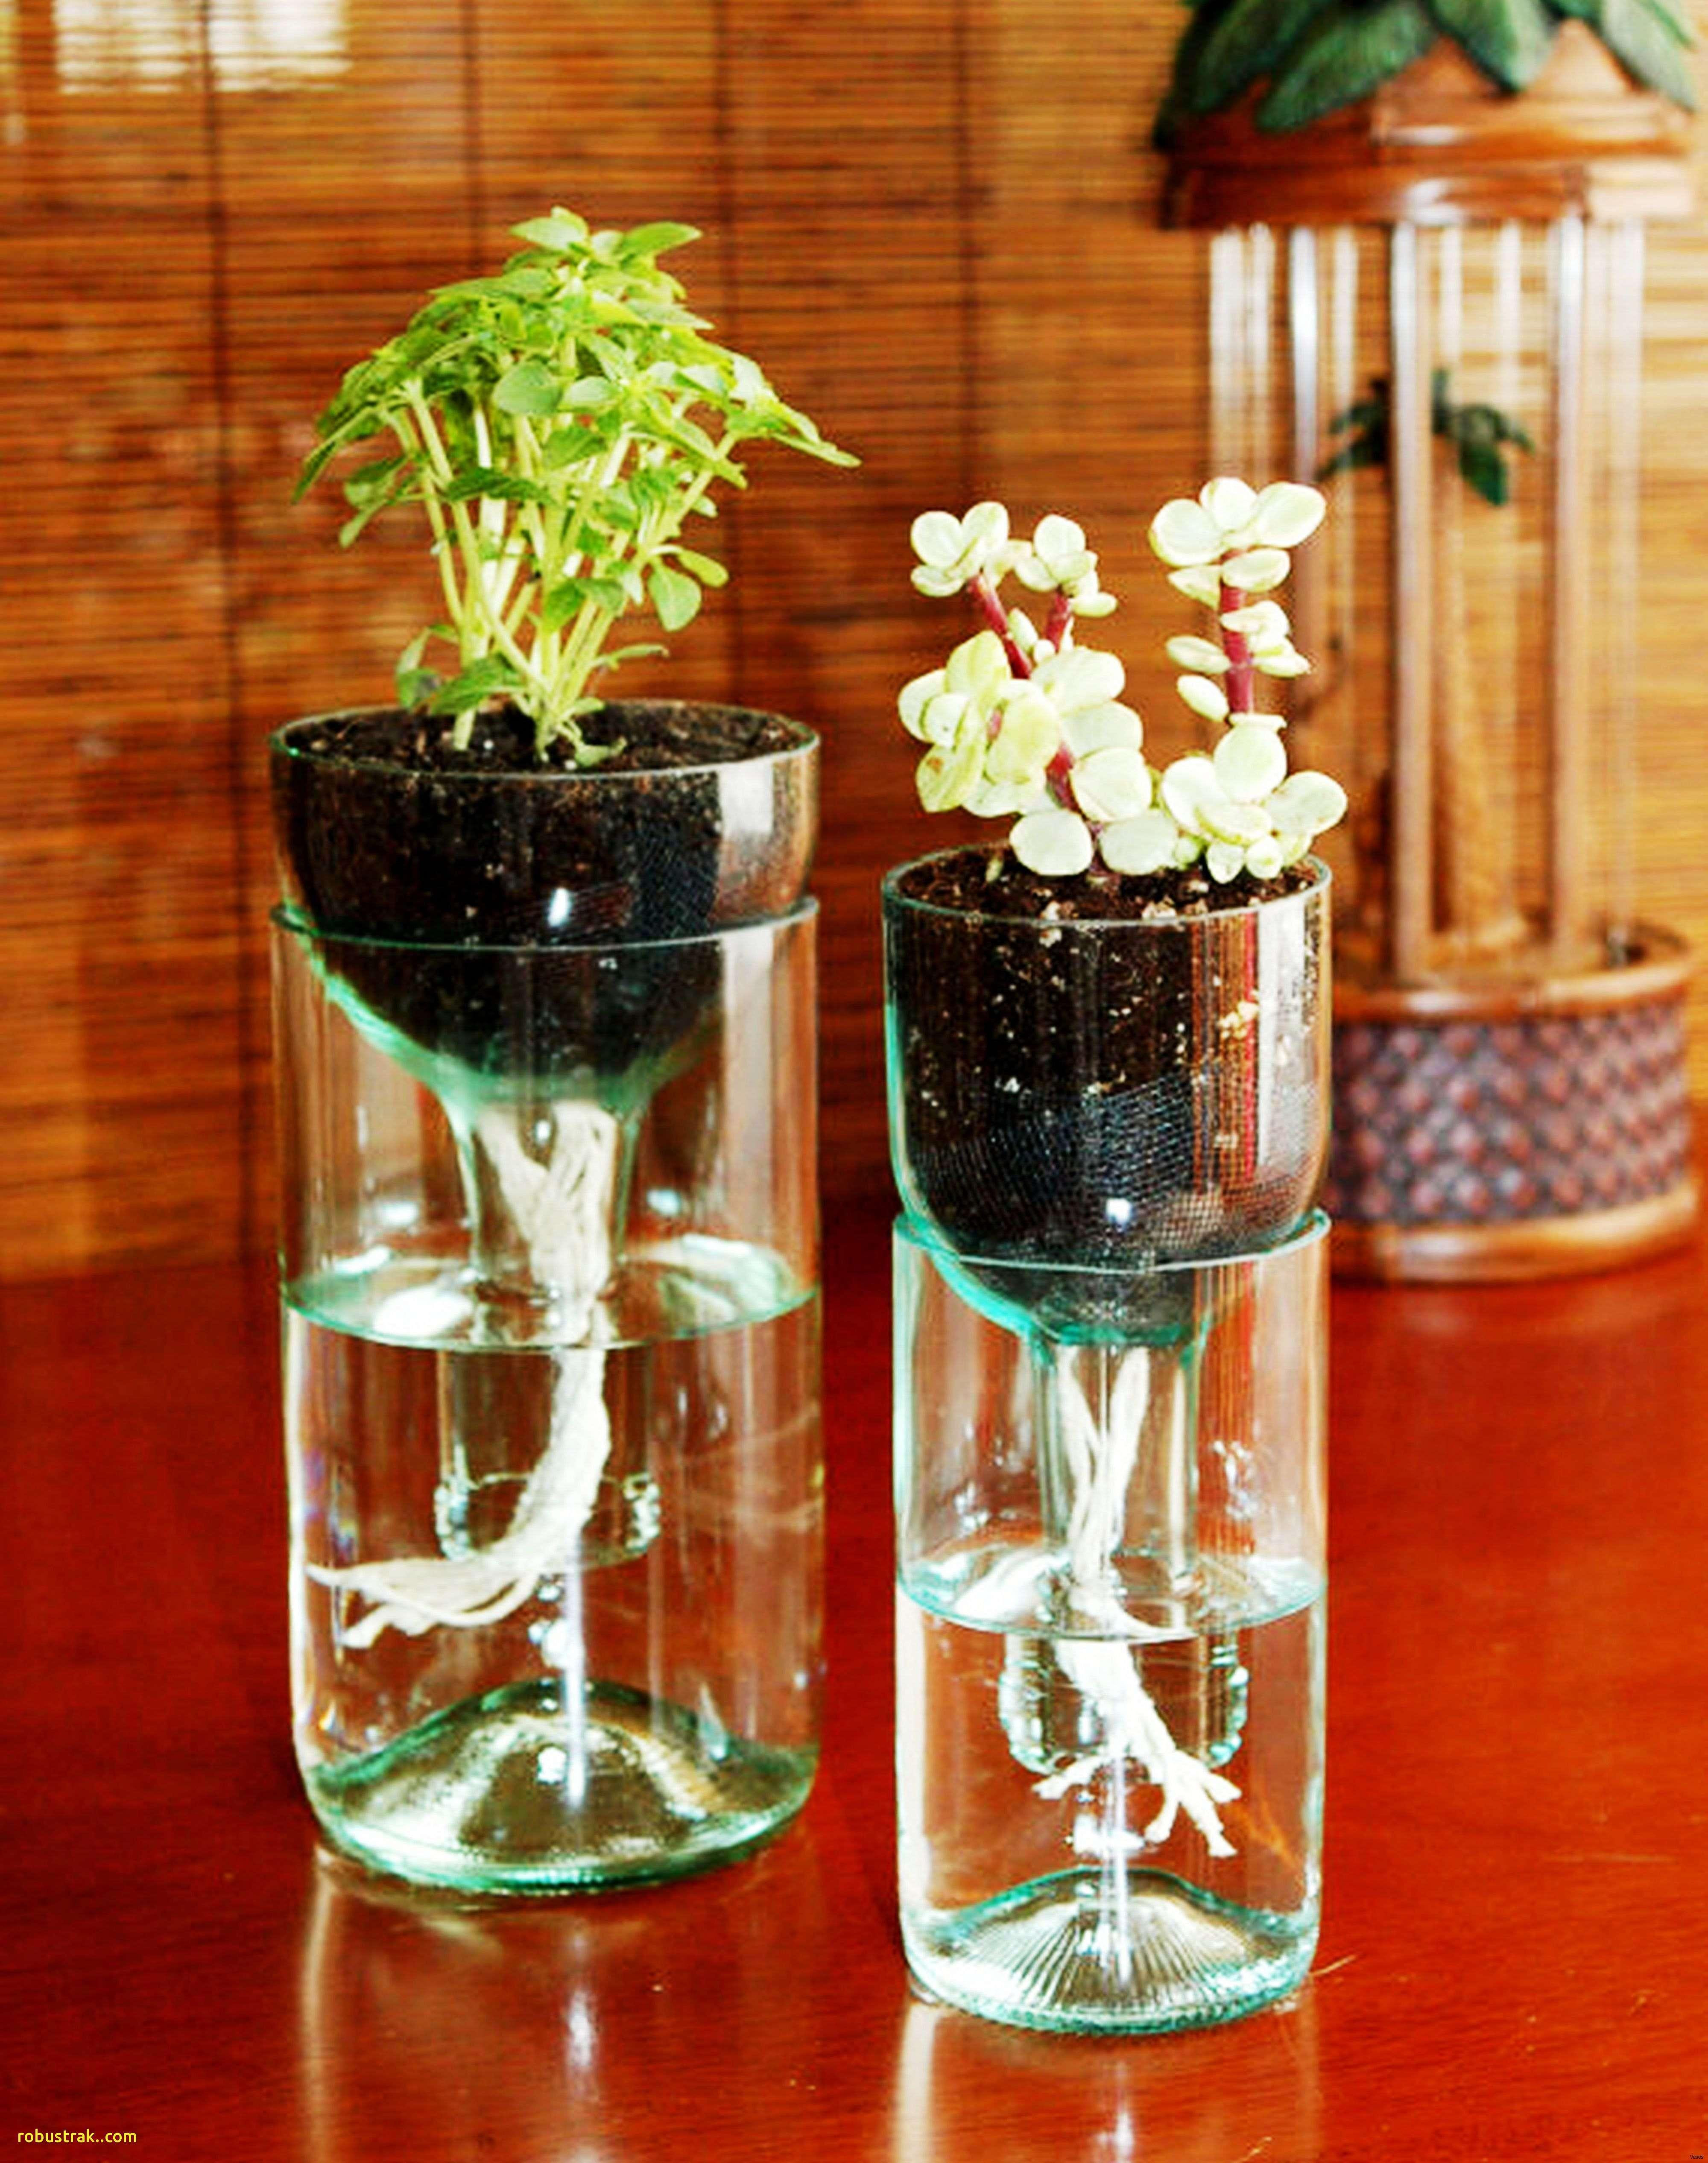 28 Recommended Small Square Vases wholesale 2024 free download small square vases wholesale of diy centerpiece ideas luxury best 15 cheap and easy diy vase filler for cheap and easy diy vase diy centerpiece ideas unique 43 inspirational decoration ideas